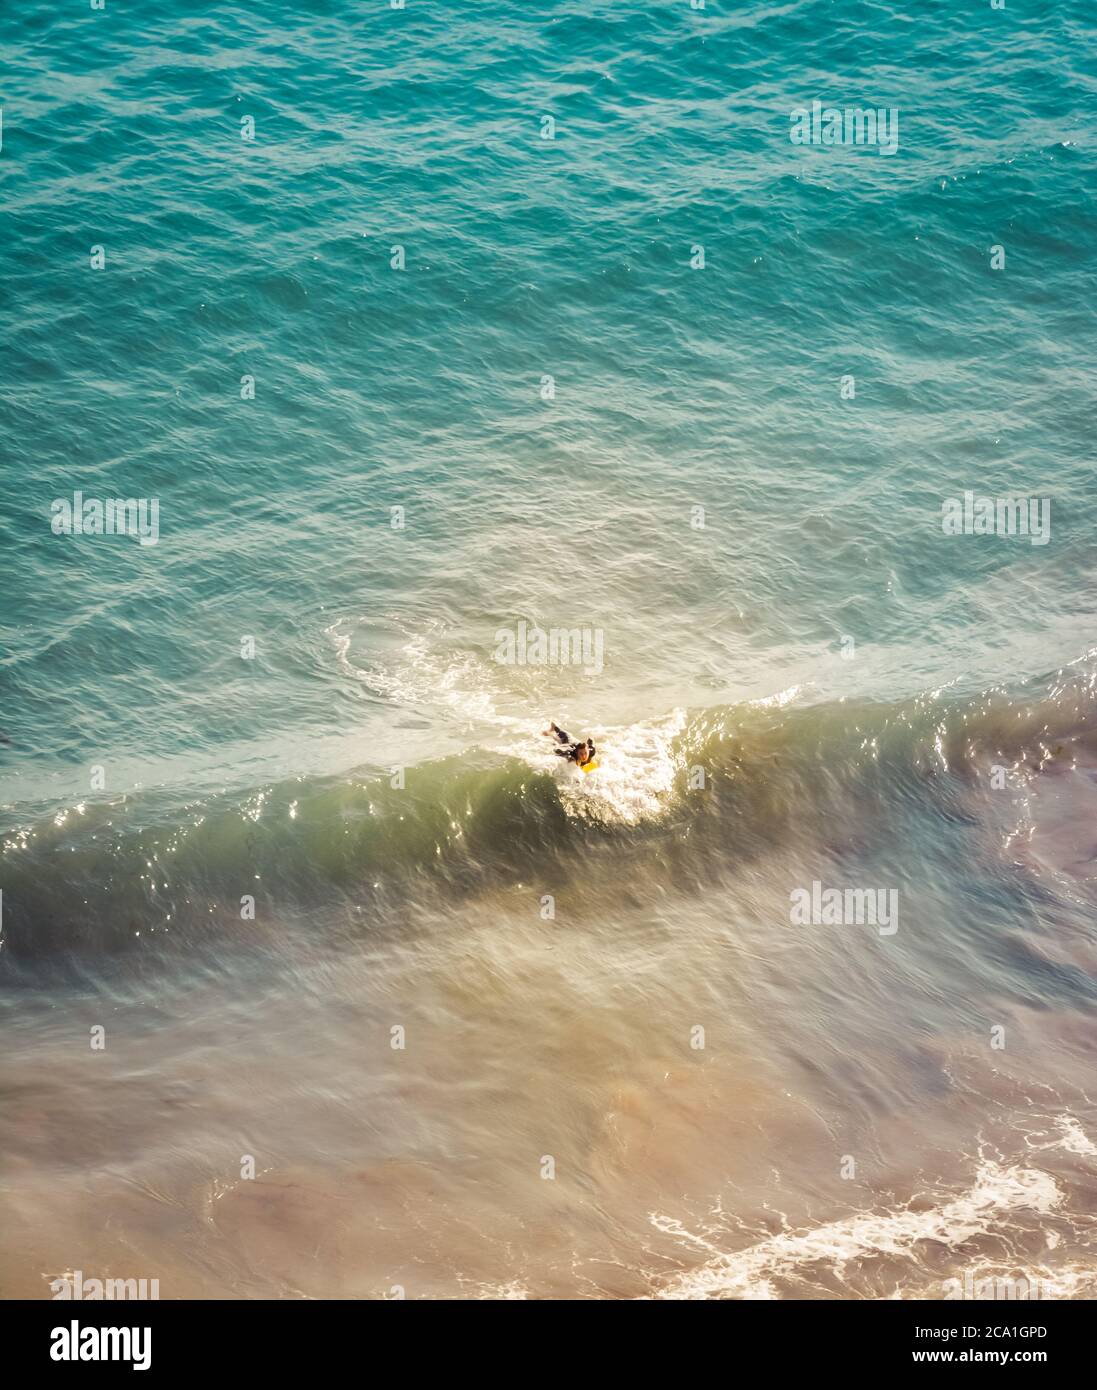 A downward view of a lone surfer attempting to catch a small wave in the Pacific Ocean near Santa Barbara, CA, USA Stock Photo